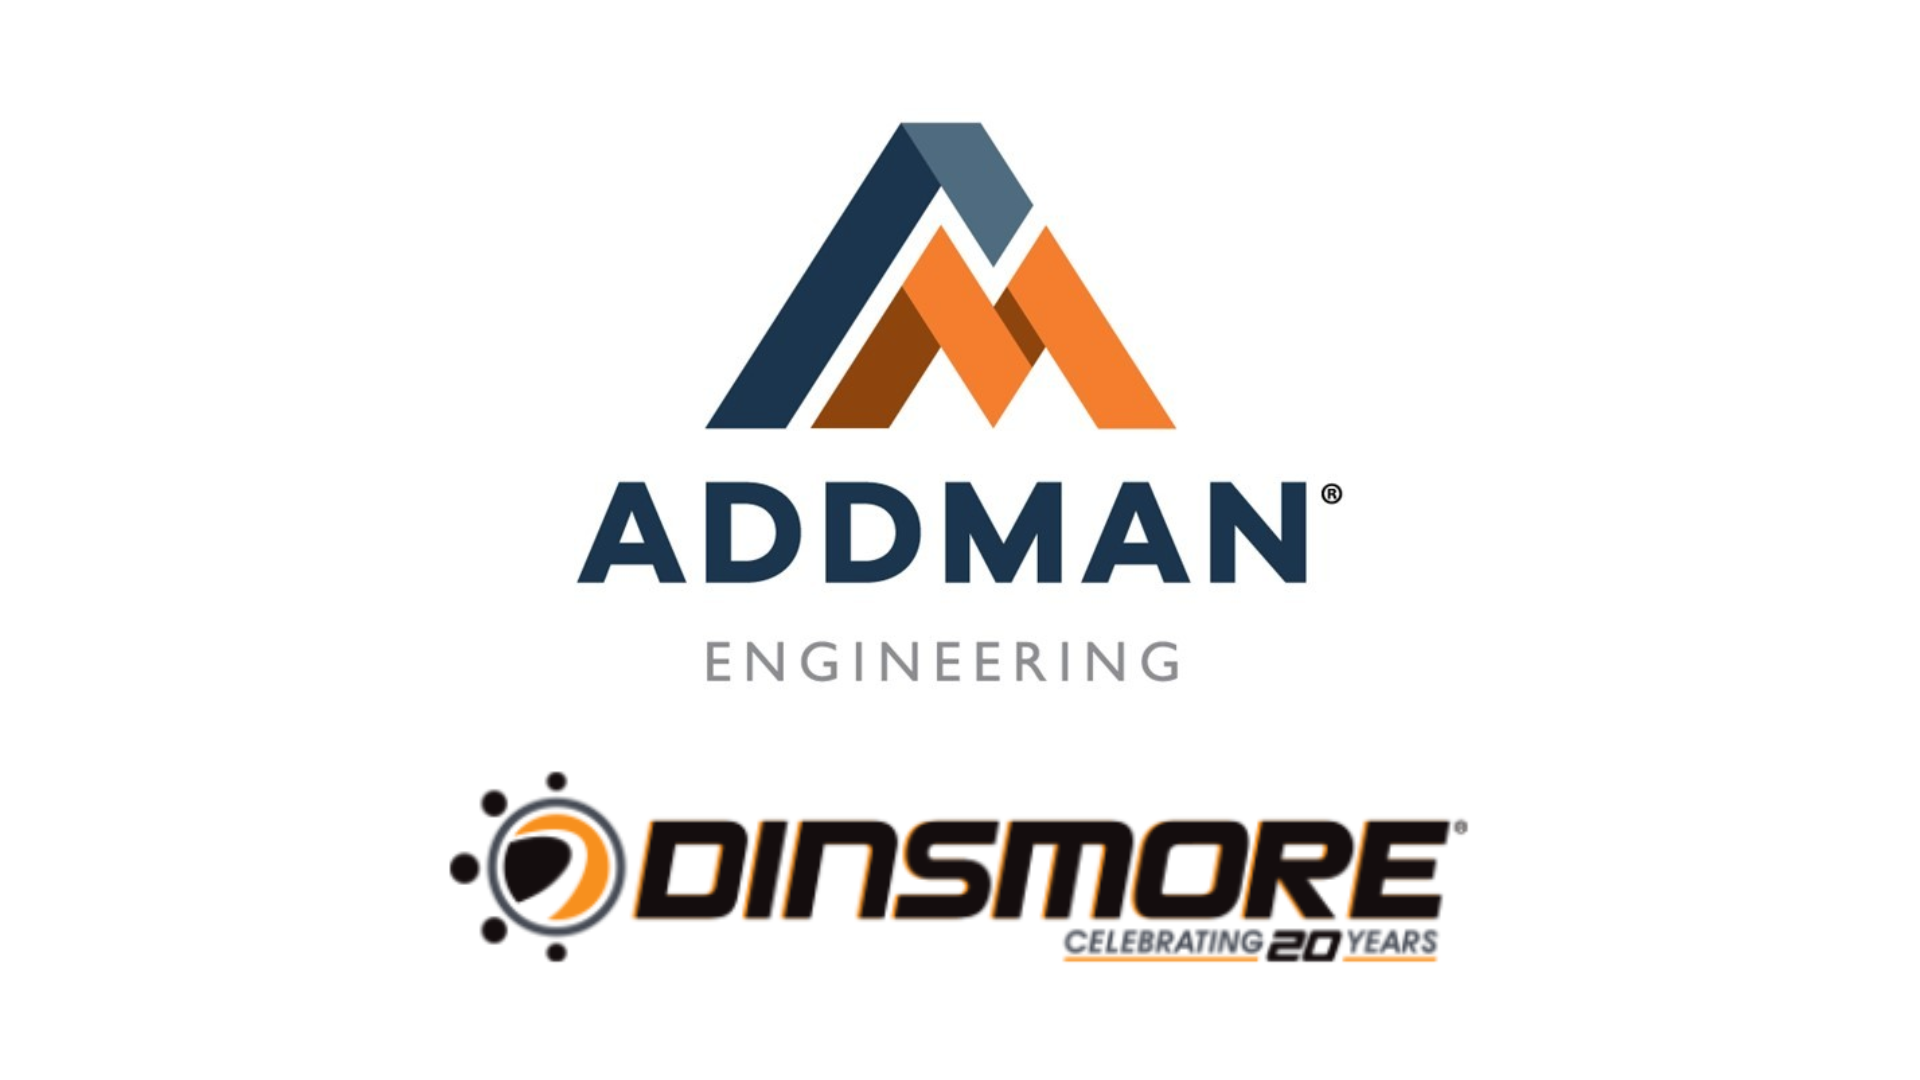 ADDMAN Engineering acquired Dinsmore & Associates expanding their polymer additive services to its manufacturing solutions network.